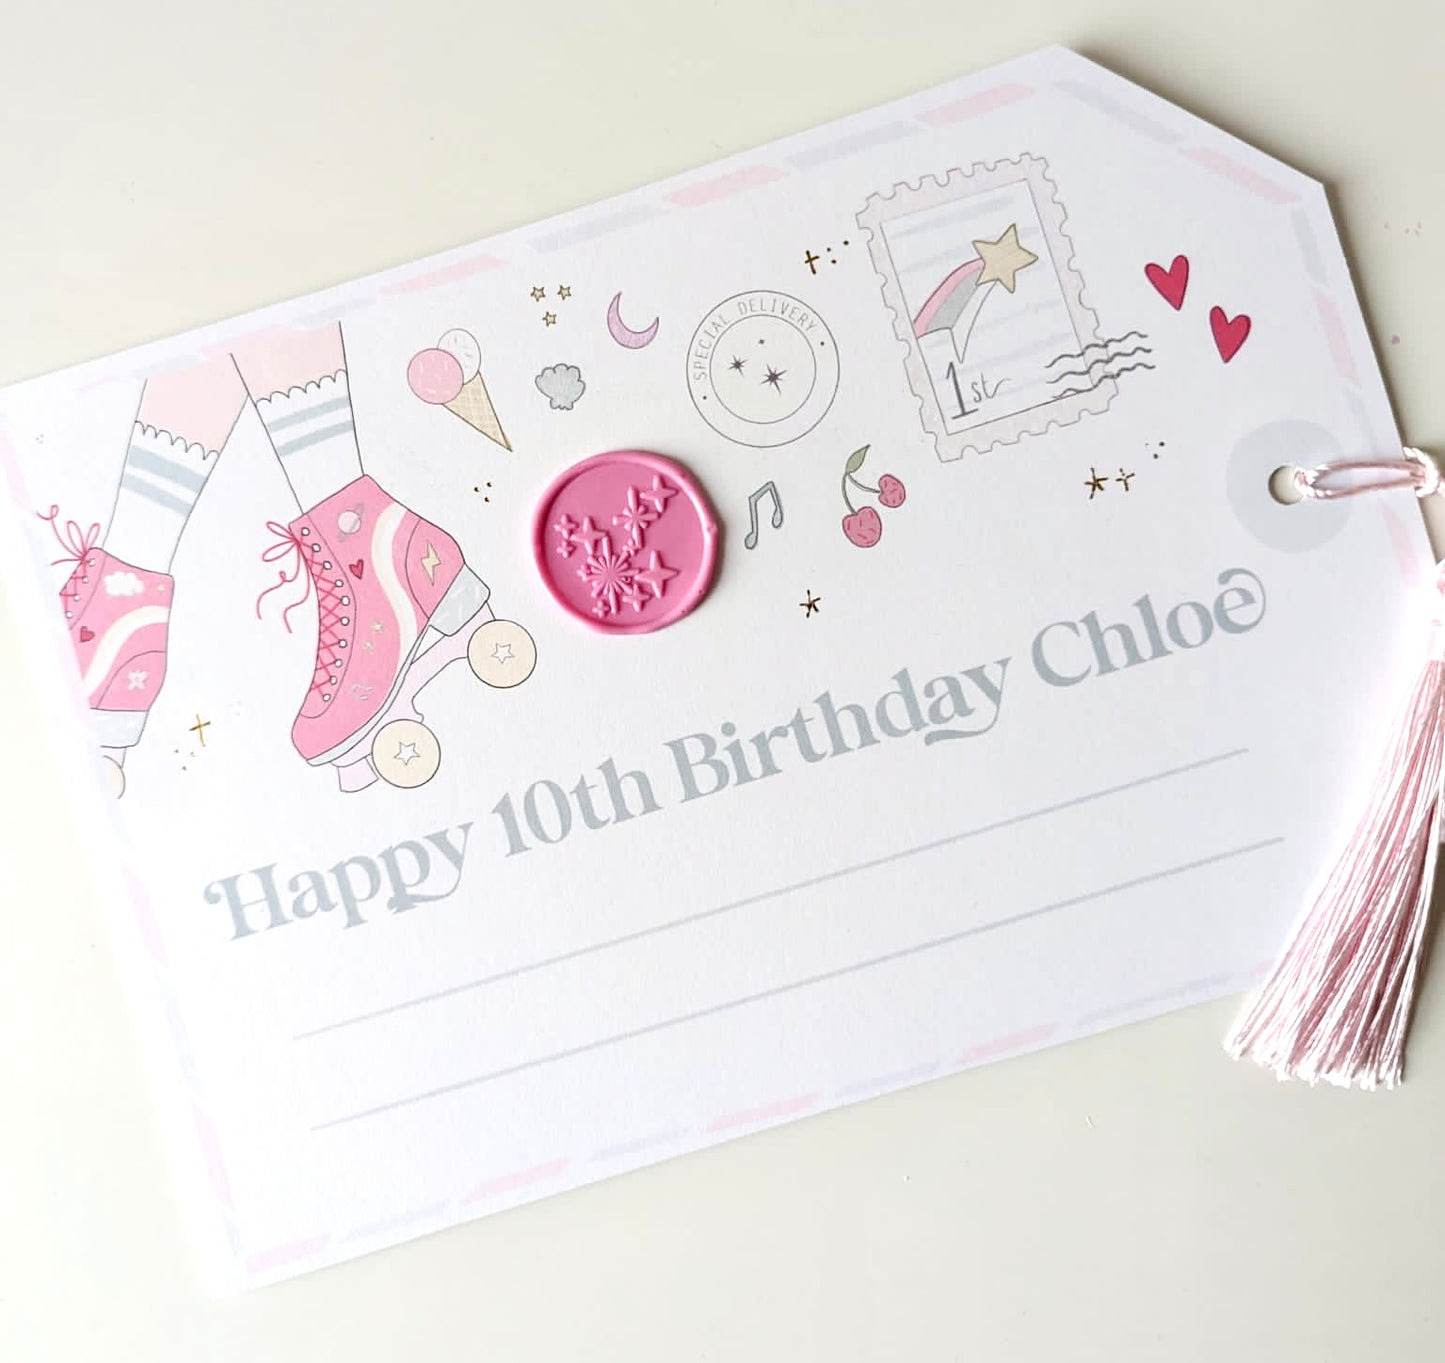 Giant Pink Roller skates personalised birthday gift tag gold foil with silk navy tassel